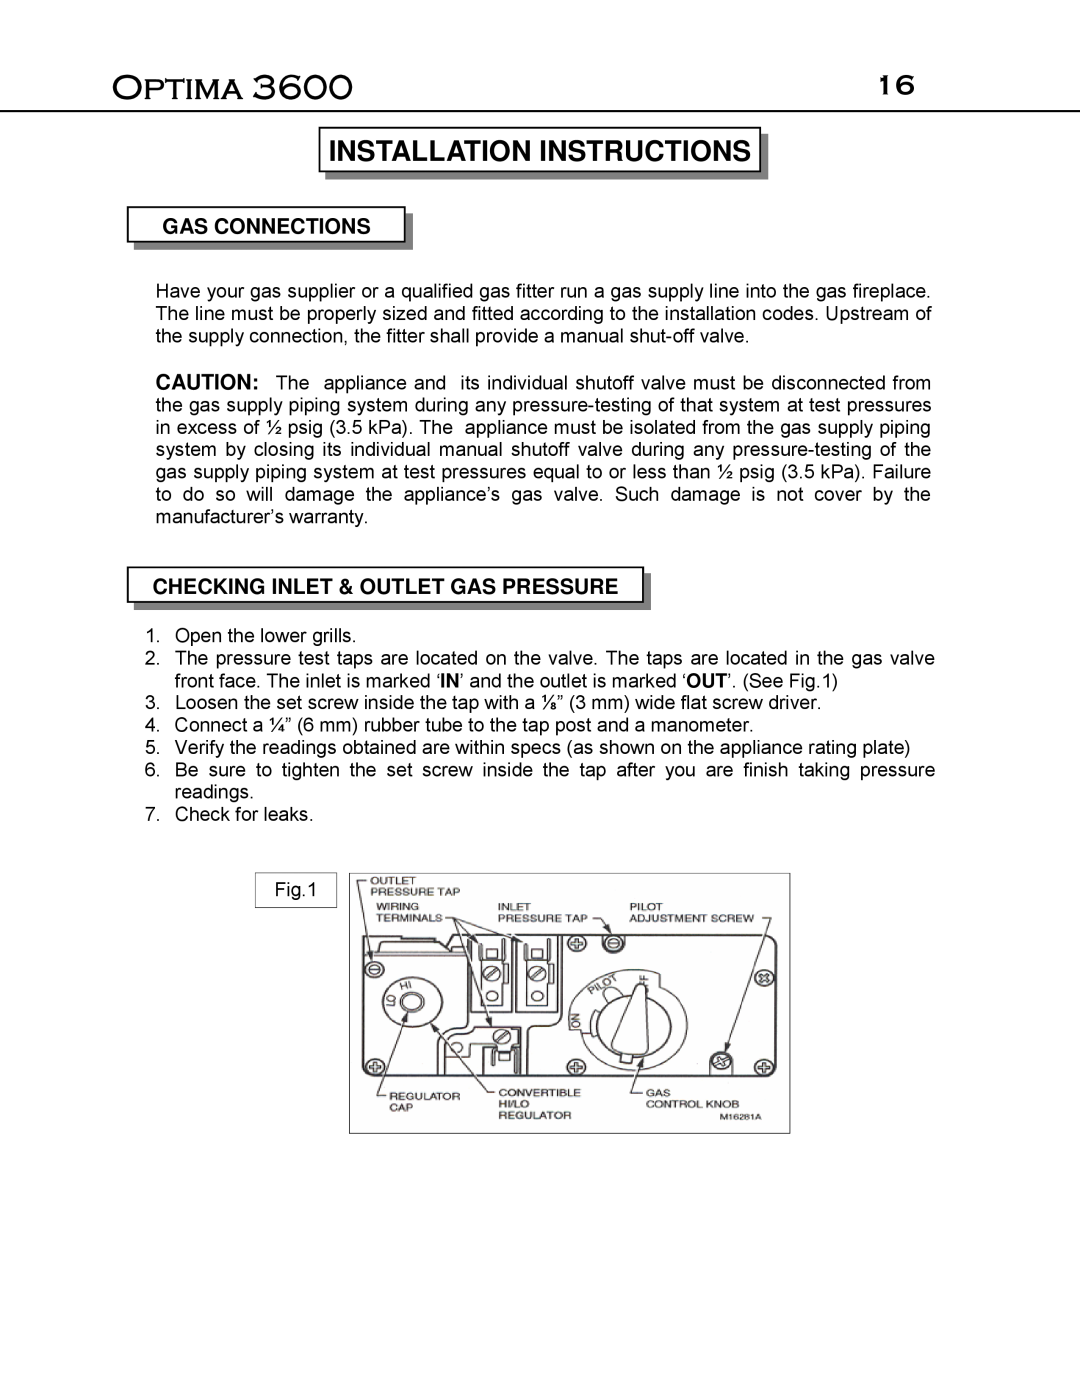 Optima Company Optima 3600O manual Gas Connections, Checking Inlet & Outlet Gas Pressure, Installation Instructions 